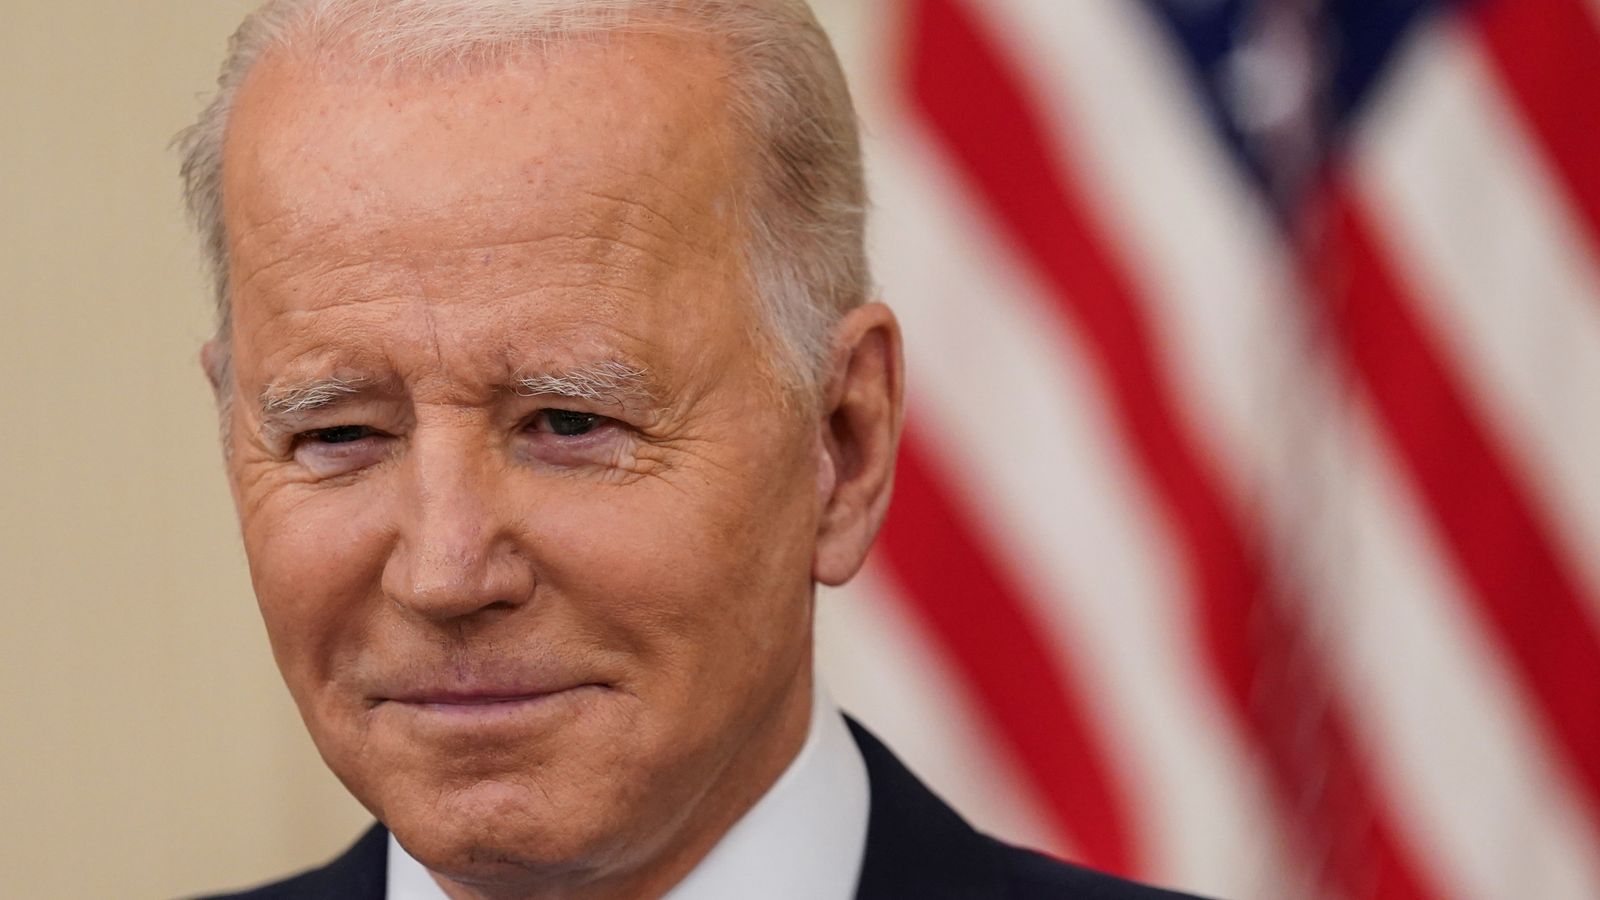 President Biden 'planning on running' in 2024 US election - but won't 'announce it yet'